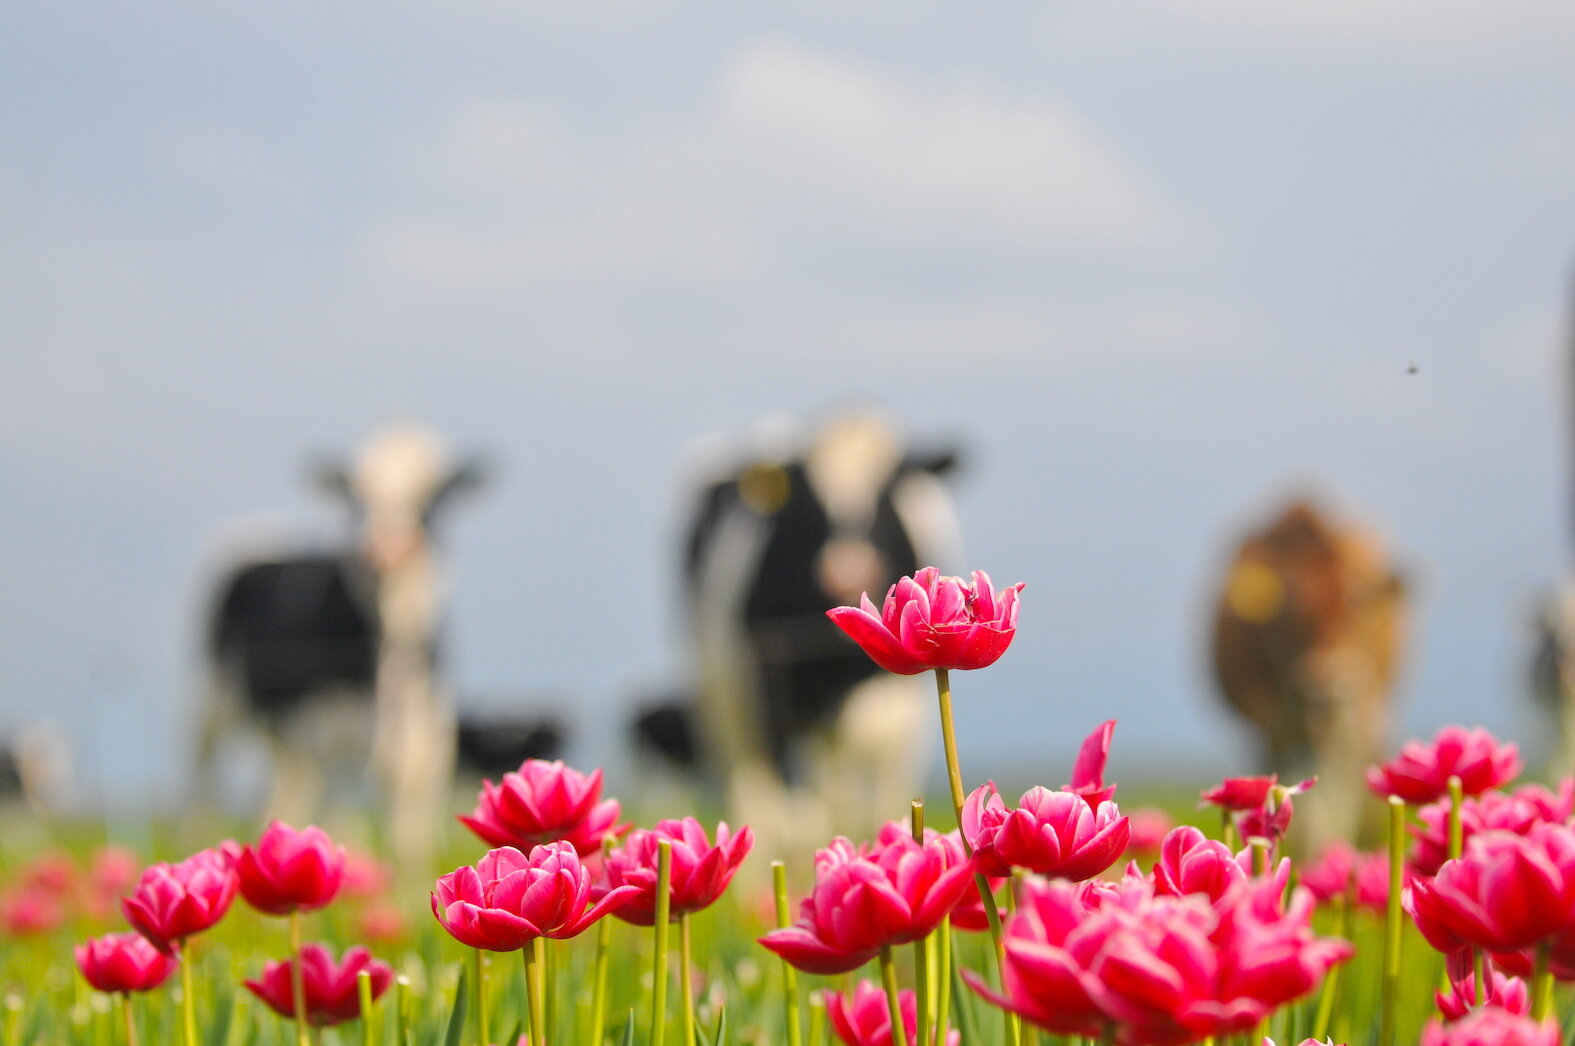 Dutch cows and tulips photography therapy and workshops by Amsterdam photographer Tom van der Leij.JPG